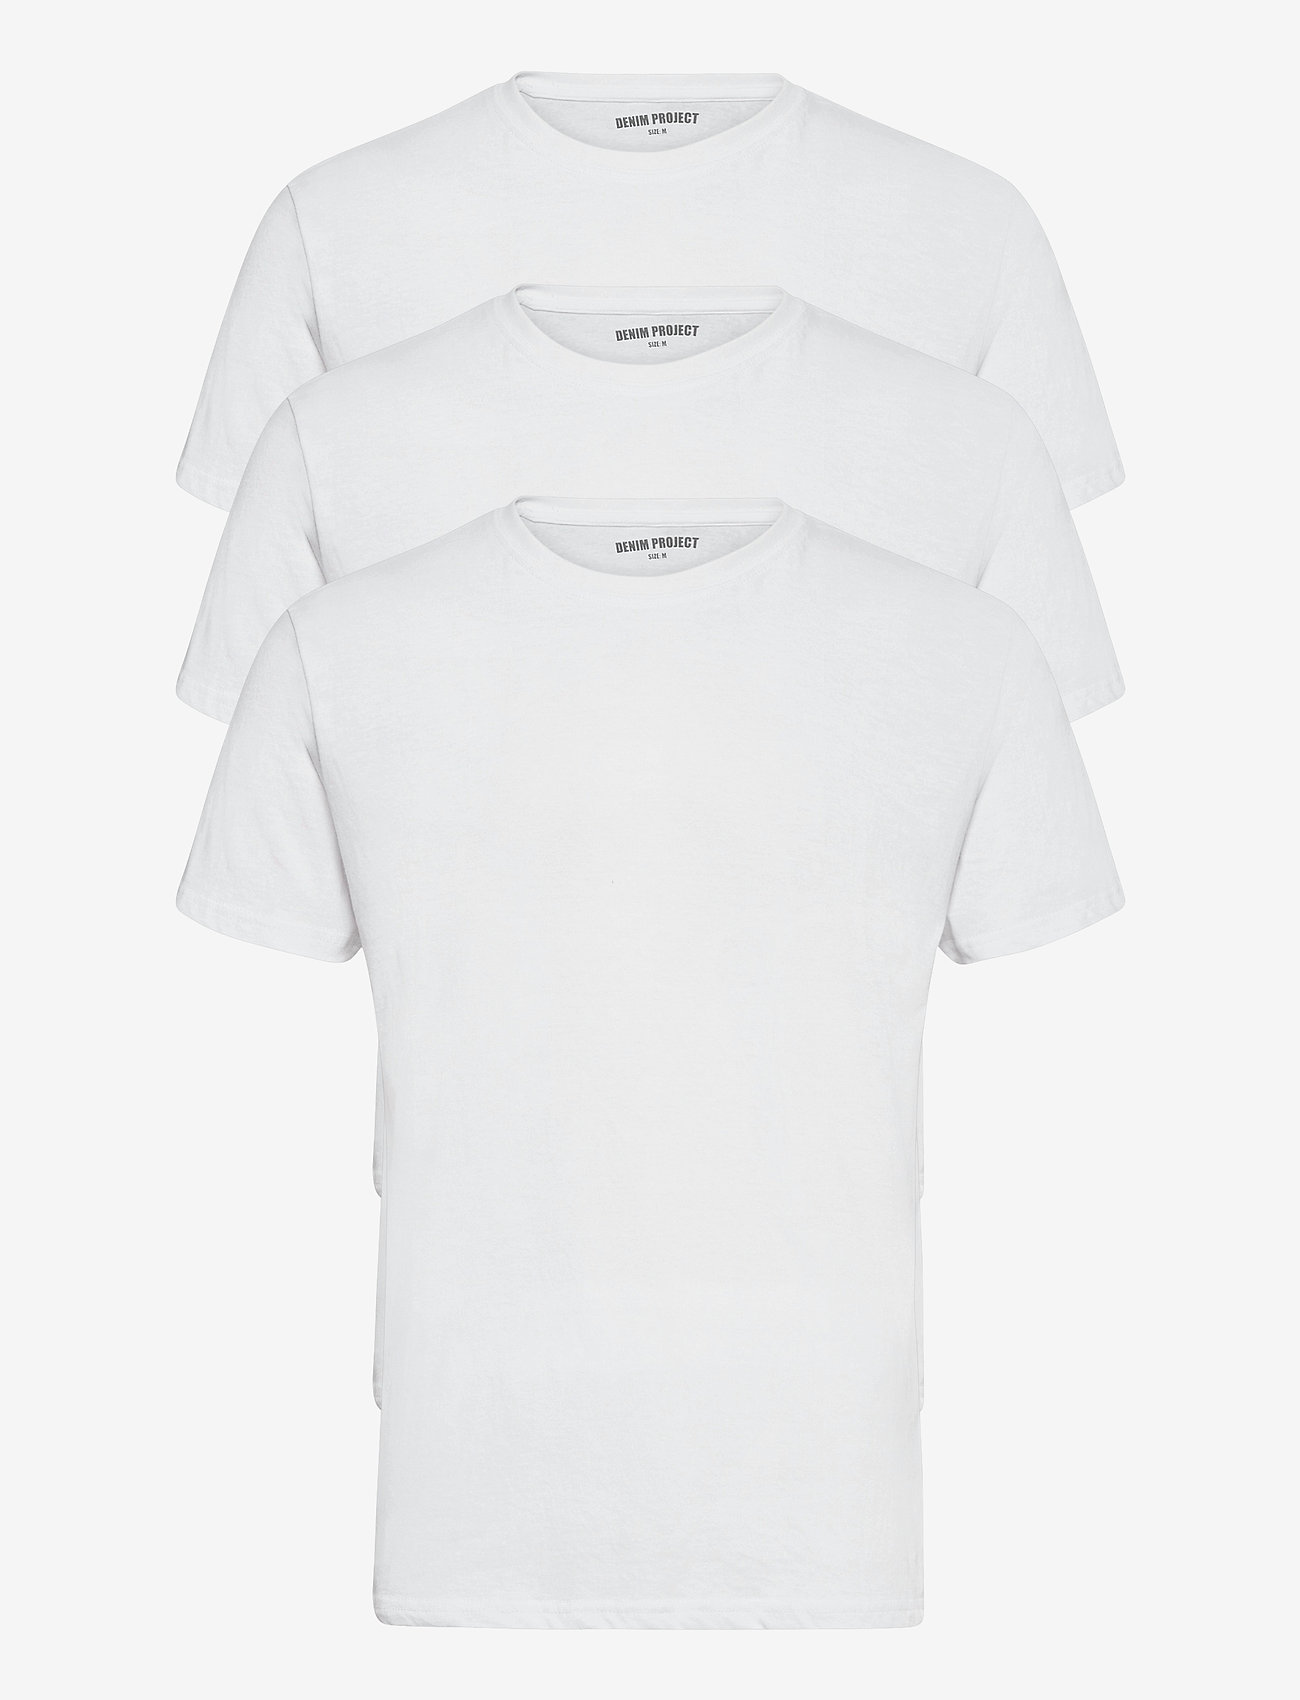 Denim project - 3 PACK T-SHIRTS - lowest prices - white - 0